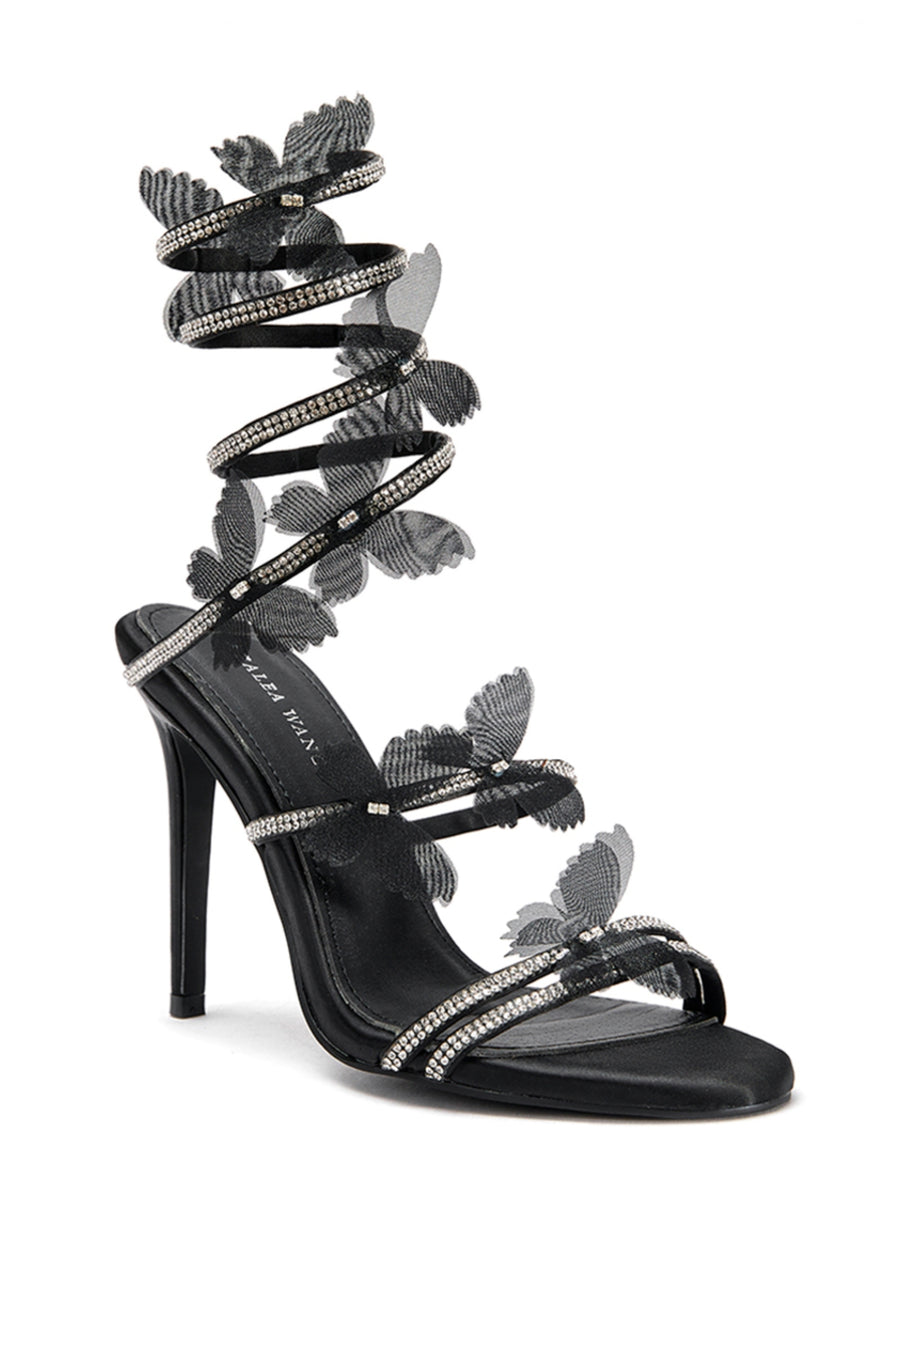 Side view of Black stiletto heels with crystal embellished wrap up detail and tulle butterfly accents on the straps